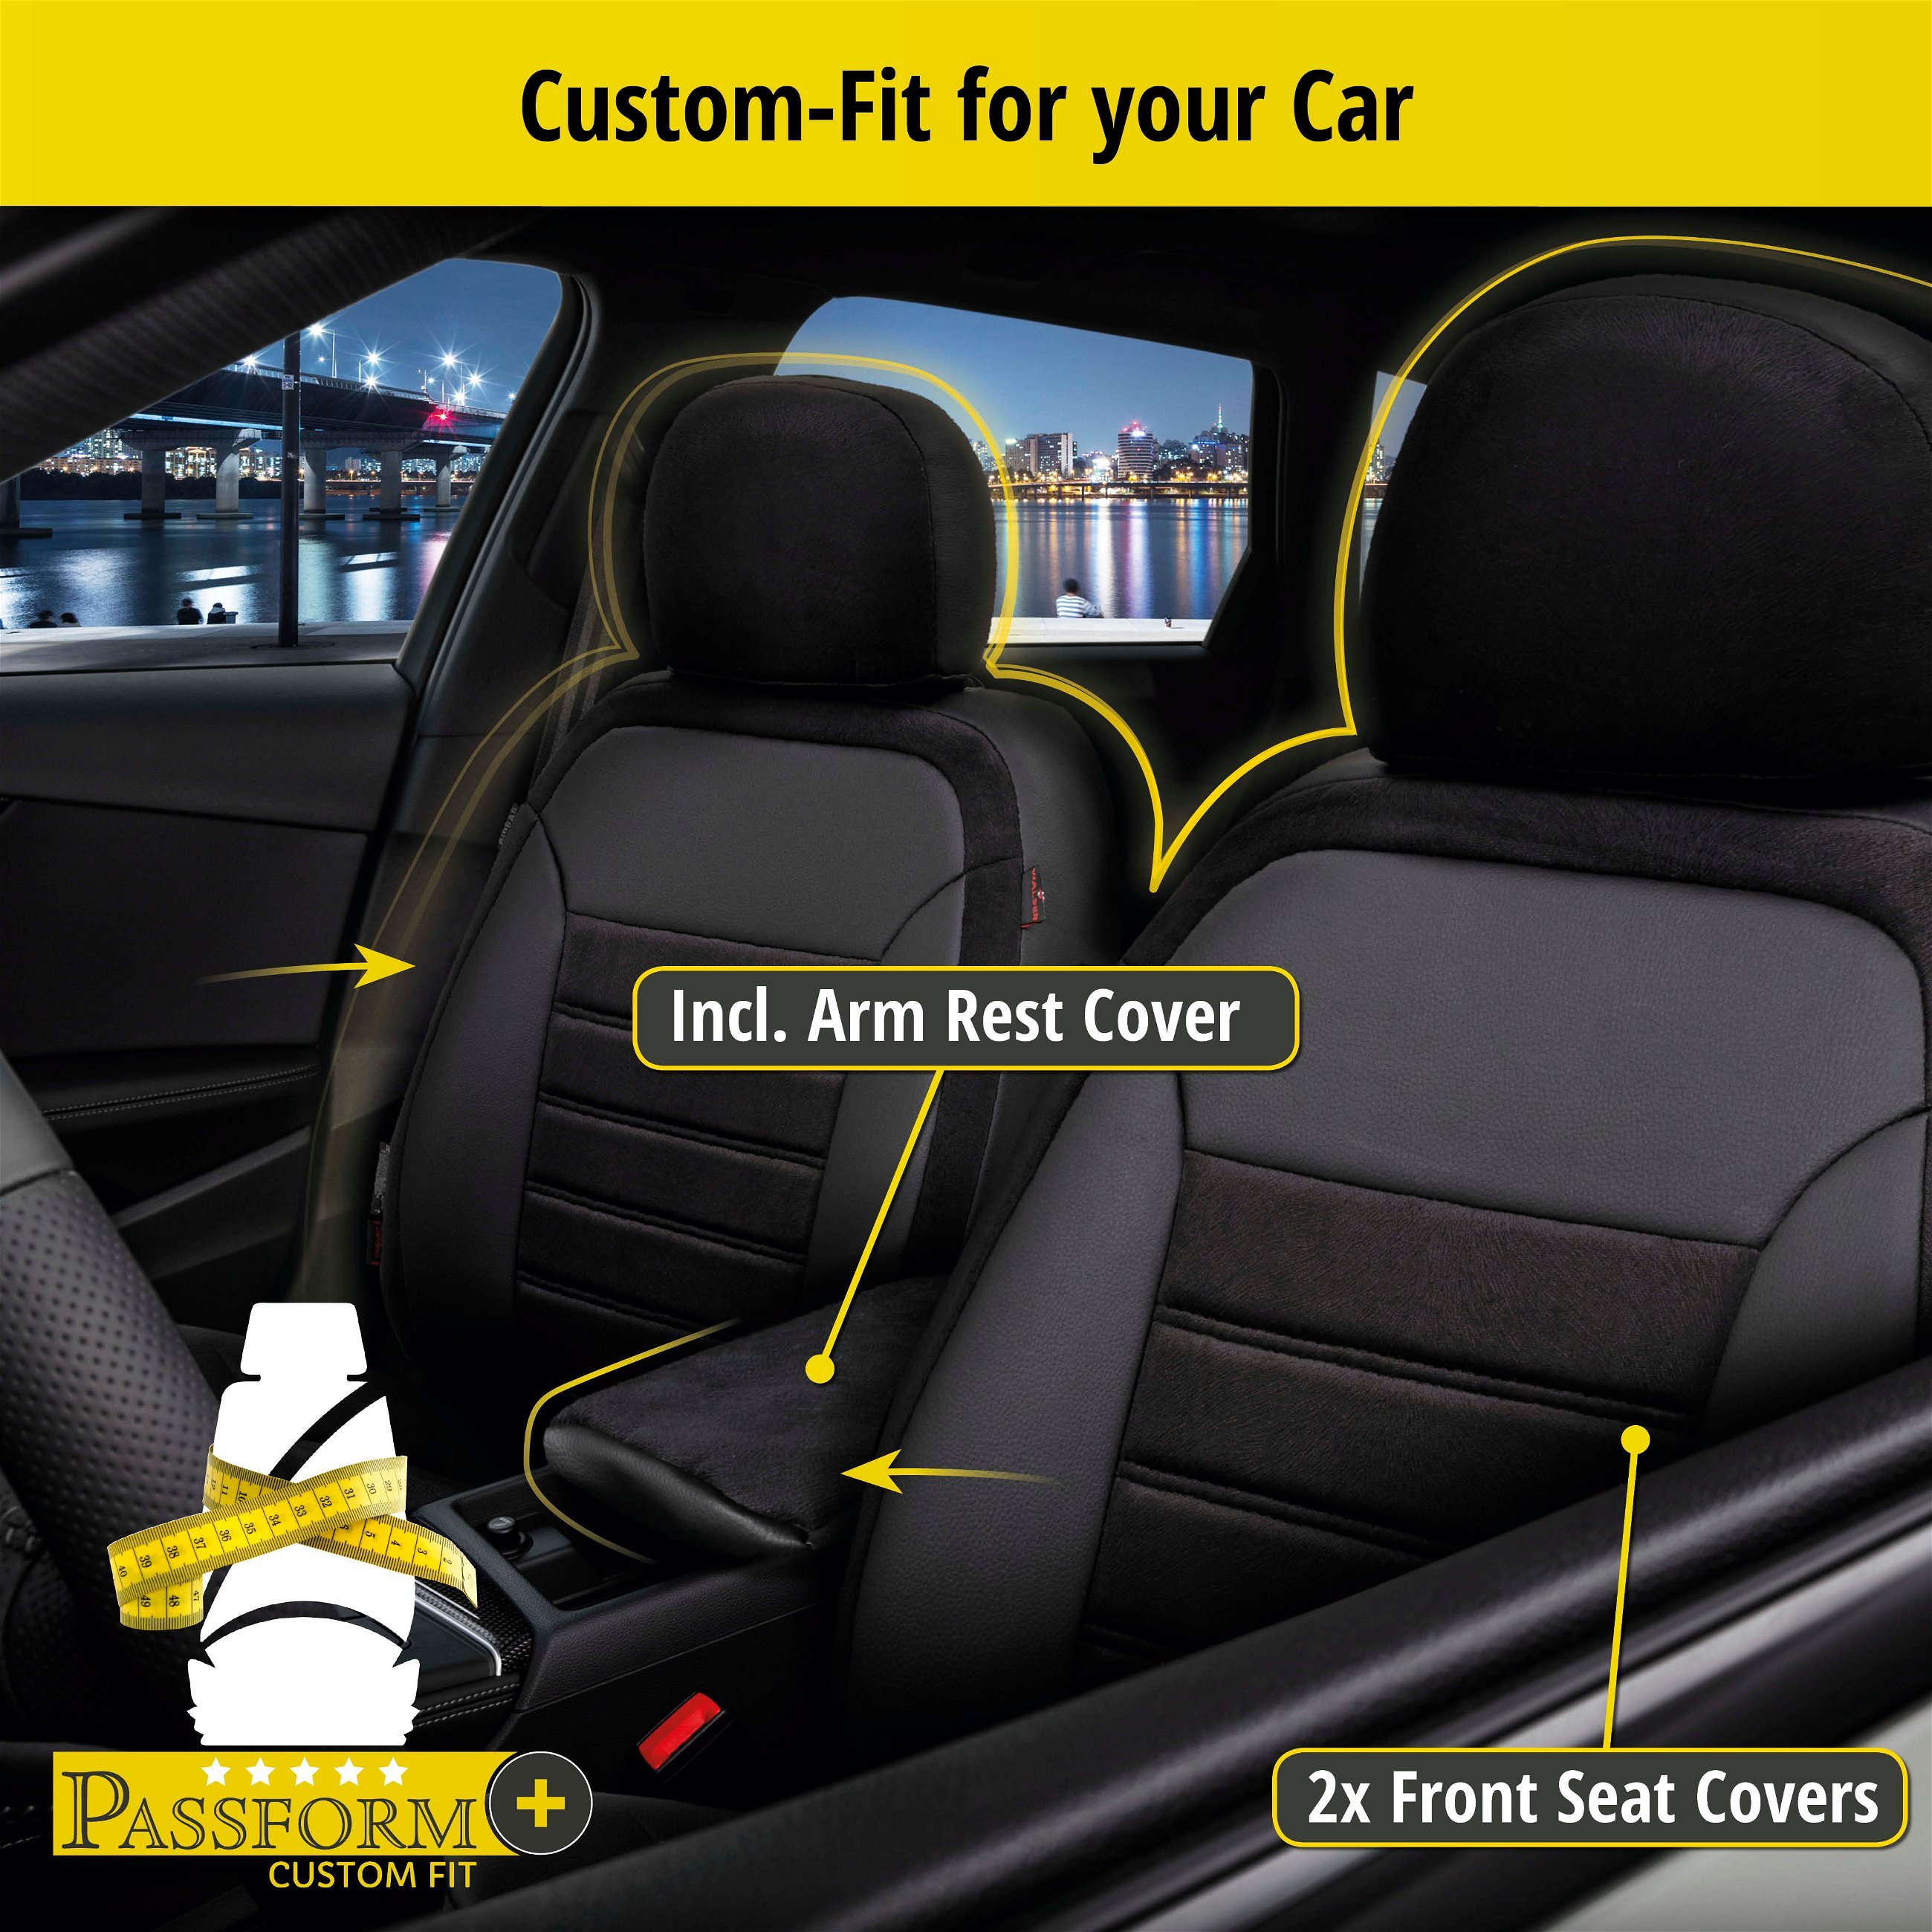 Seat Cover Bari for Hyundai ix35 (LM, EL, ELH) 08/2009-Today, 2 seat covers for normal seats